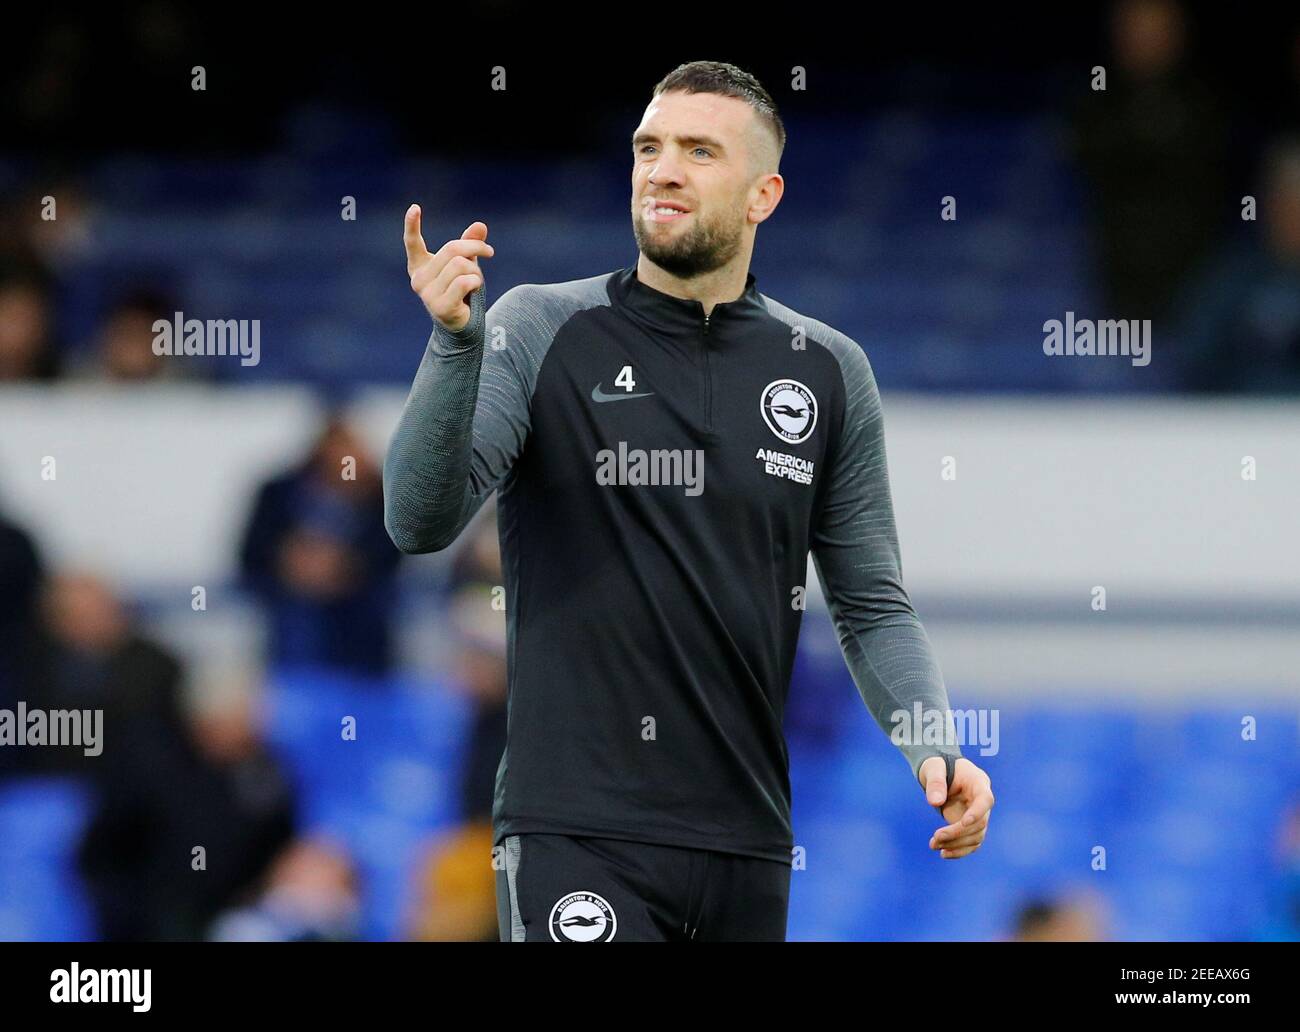 greb blad Kano Soccer Football - Premier League - Everton v Brighton & Hove Albion -  Goodison Park, Liverpool, Britain - January 11, 2020 Brighton & Hove  Albion's Shane Duffy during the warm up before